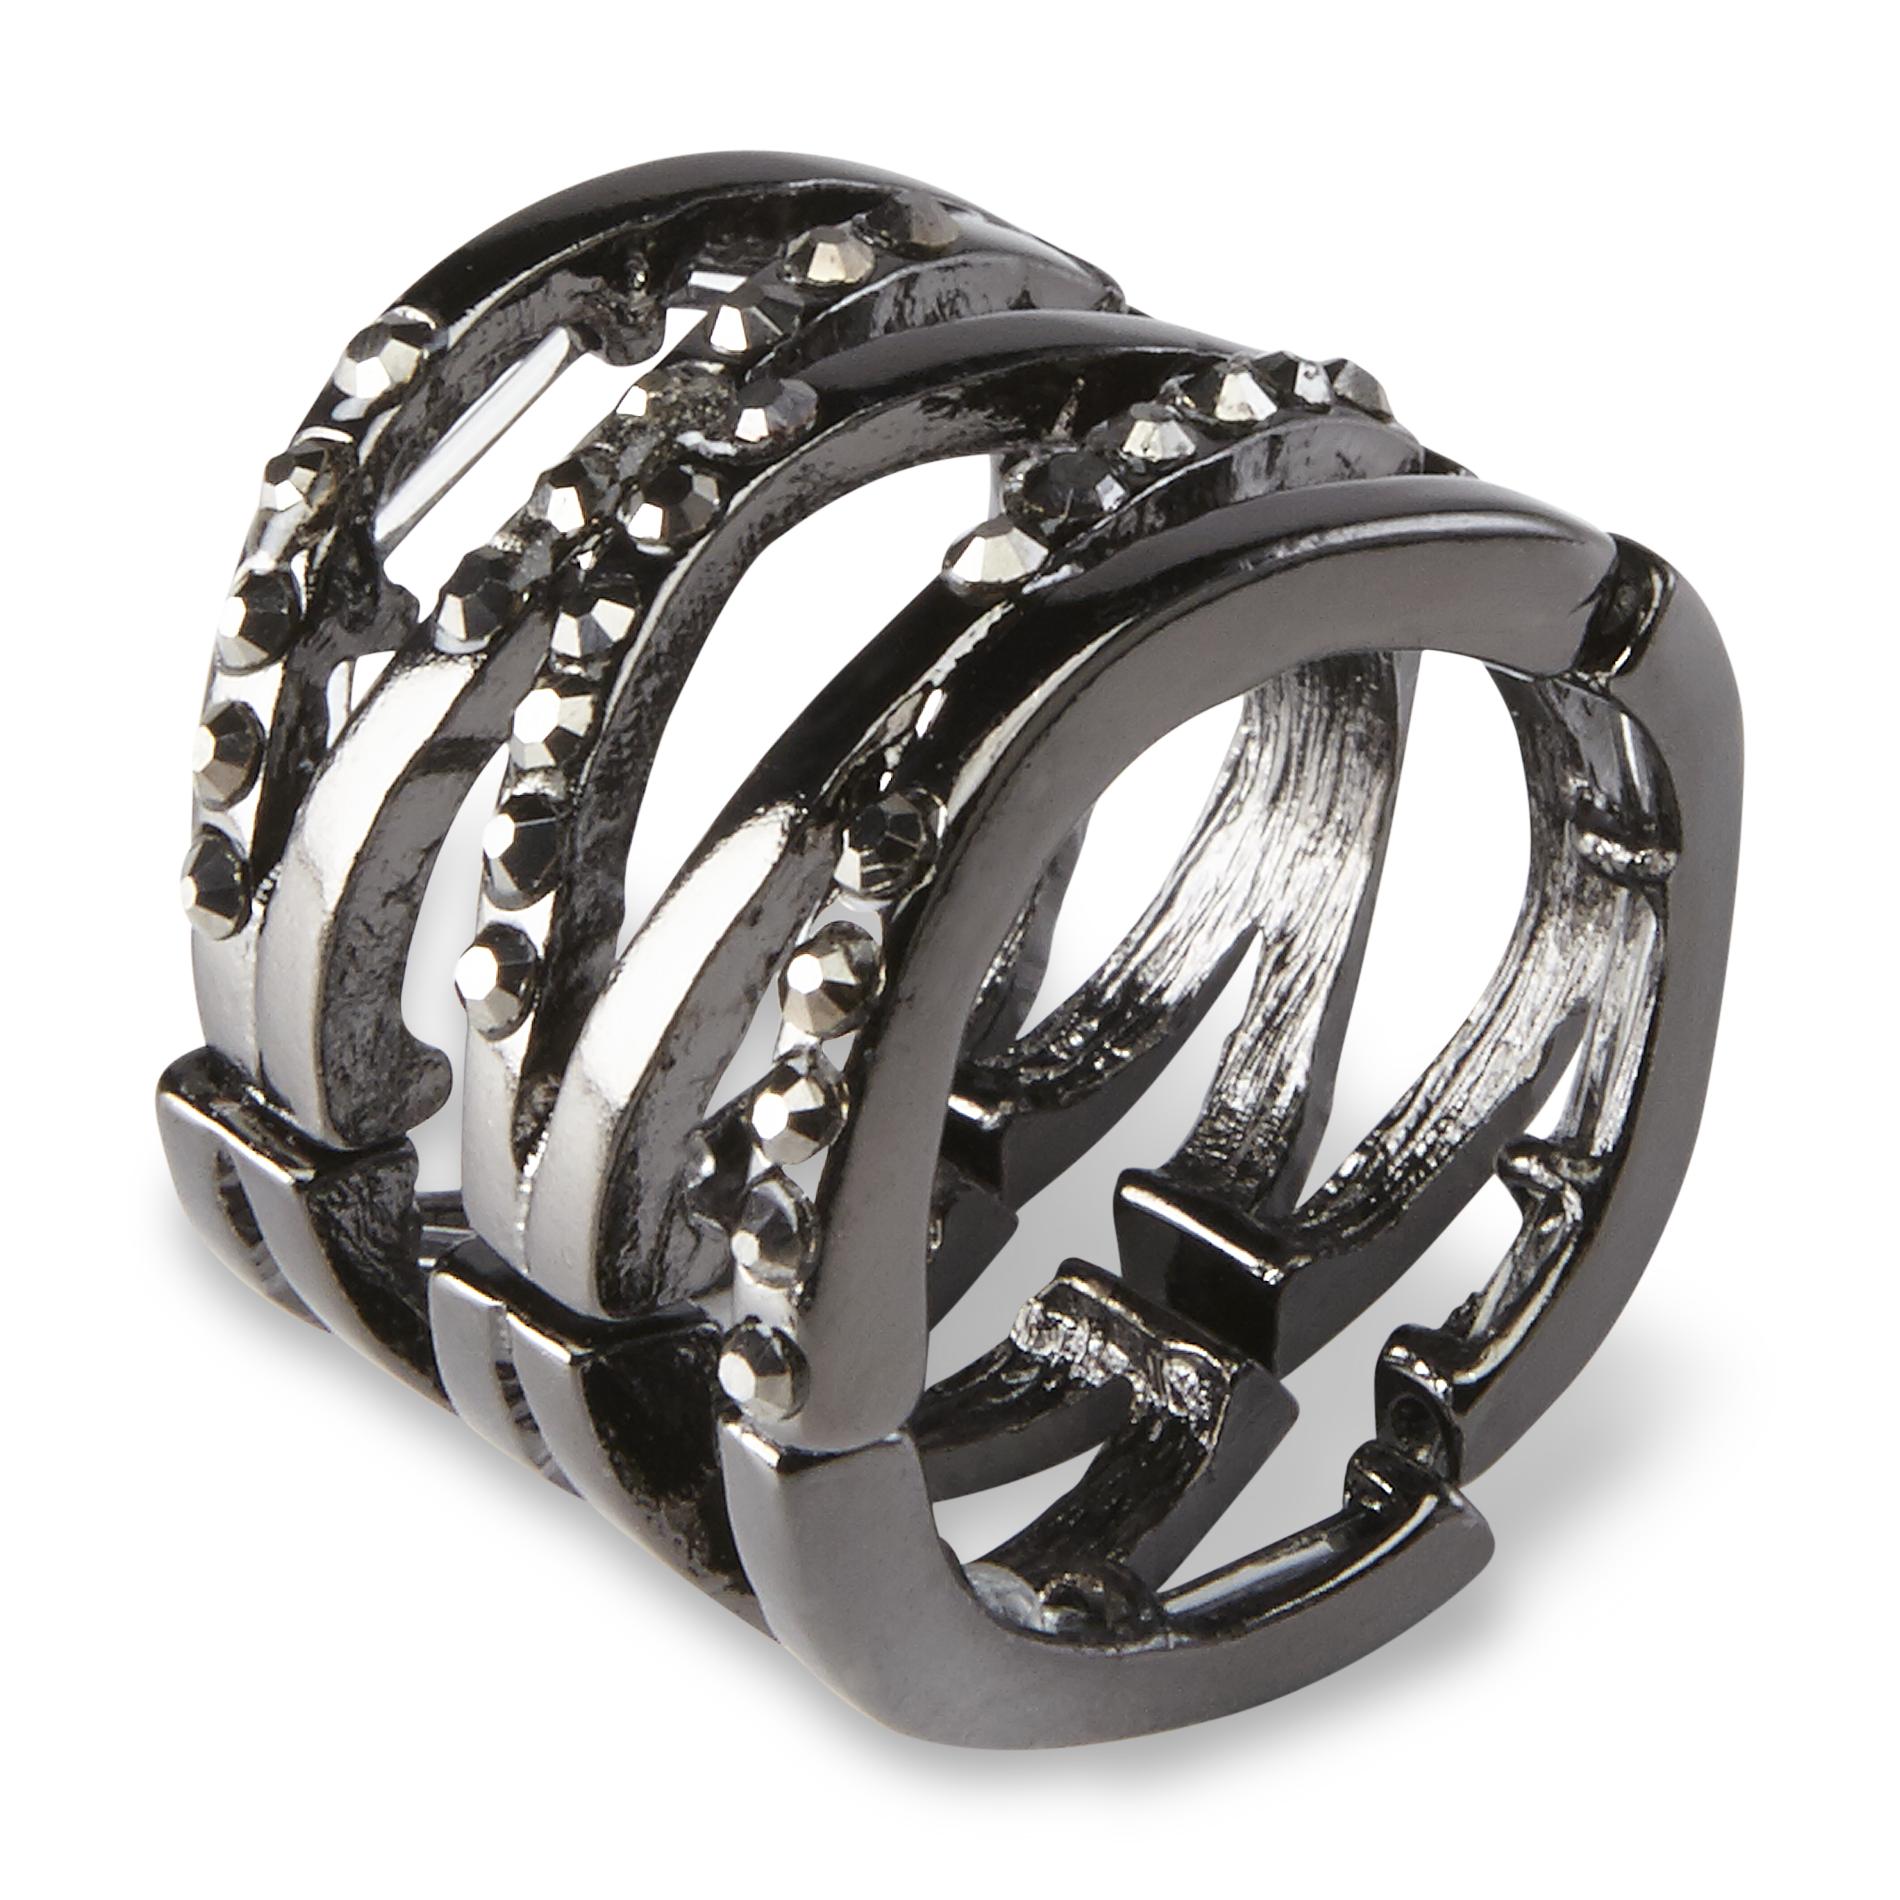 Attention Women's Jeweled Stretch Ring